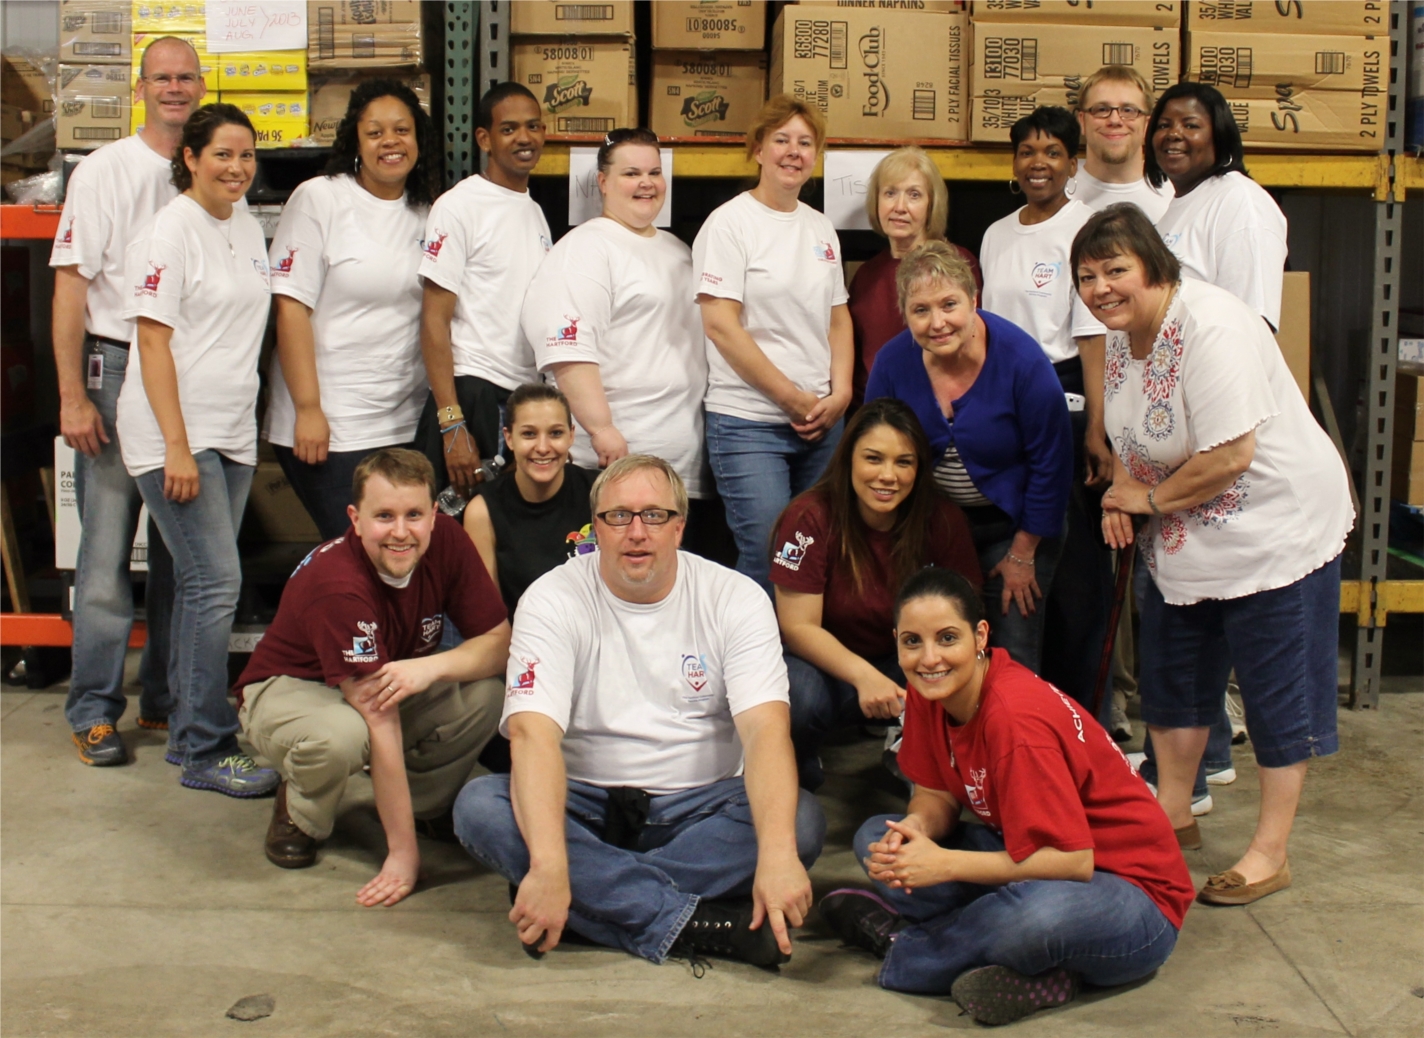 Employees from The Hartford volunteered at Green Harvest in Plainfield, IL to sort food donations and assemble summer lunch boxes for children.